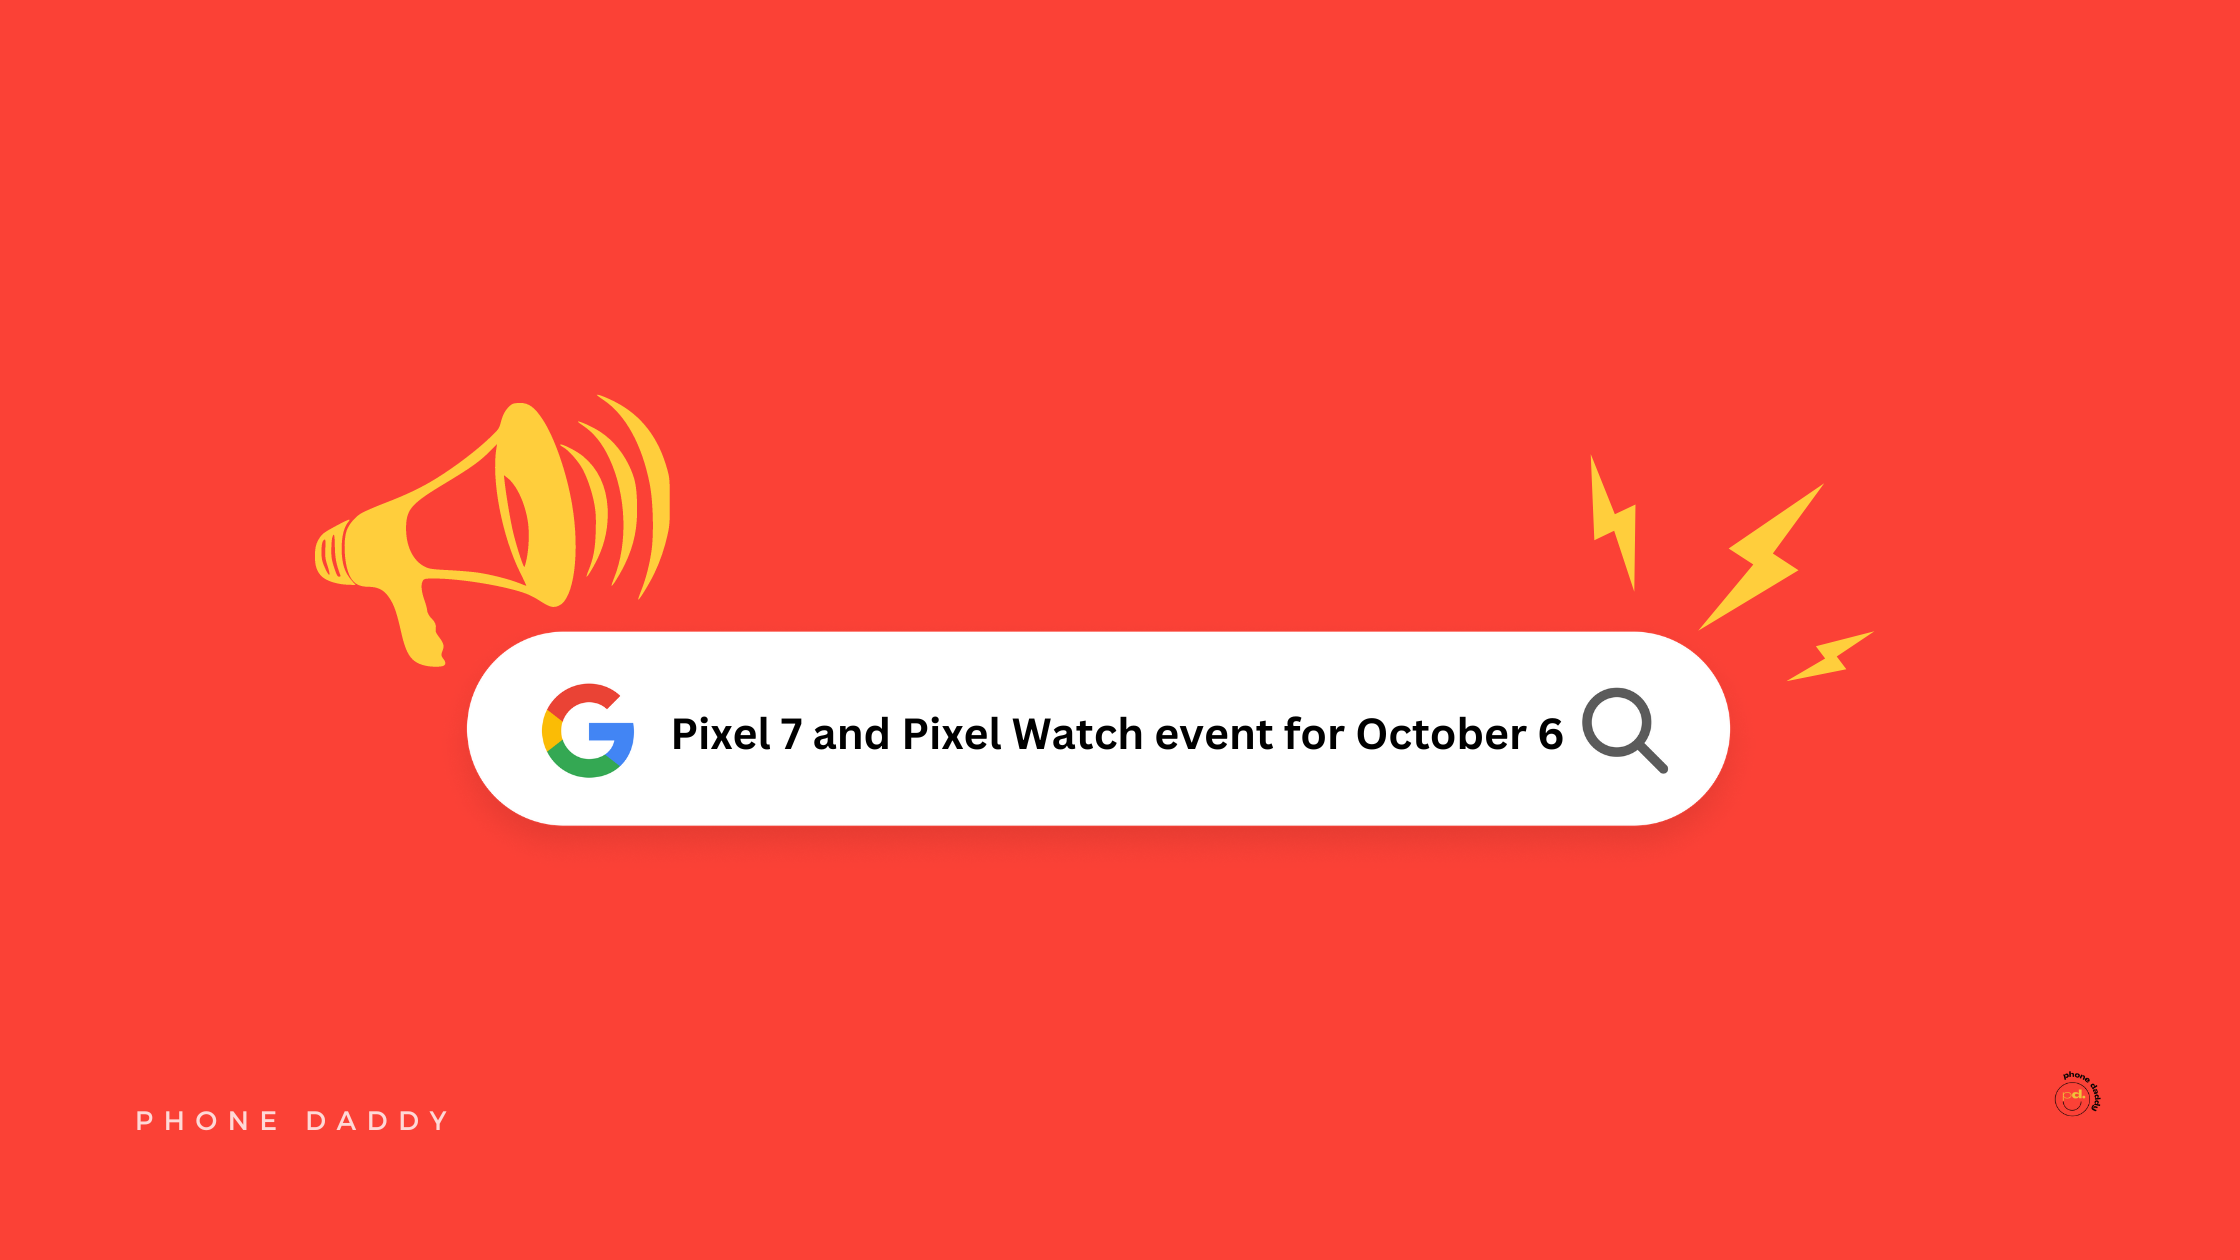 google-announces-pixel-7-and-pixel-watch-event-for-october-6